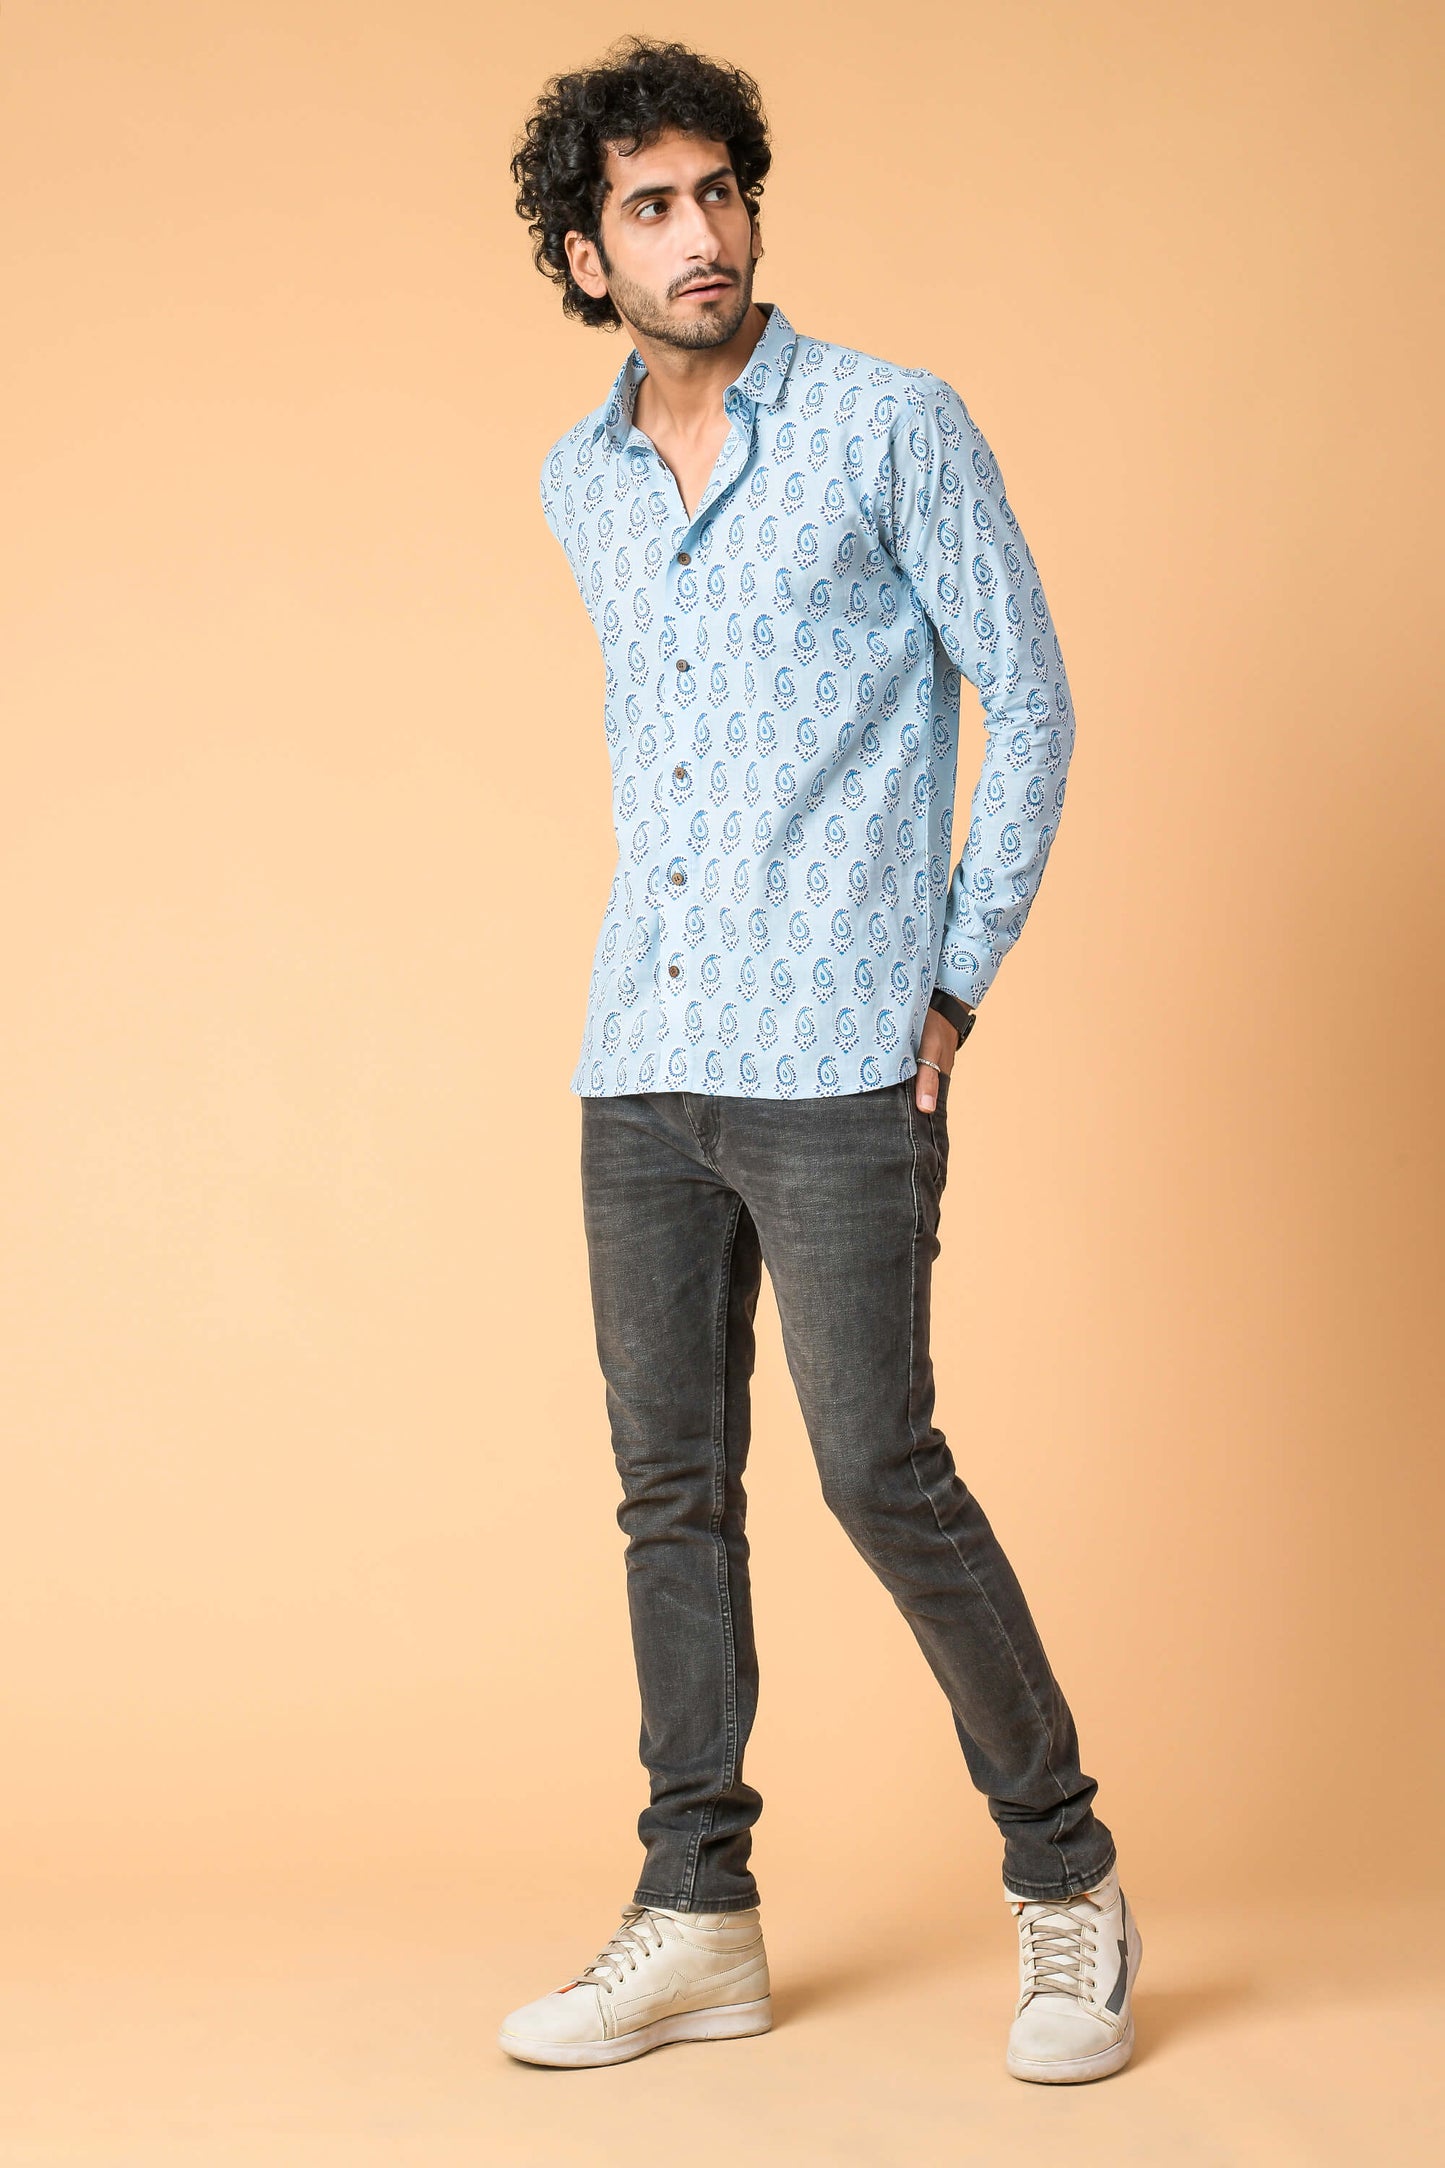 The Light Blue Shirt With Paisley Print